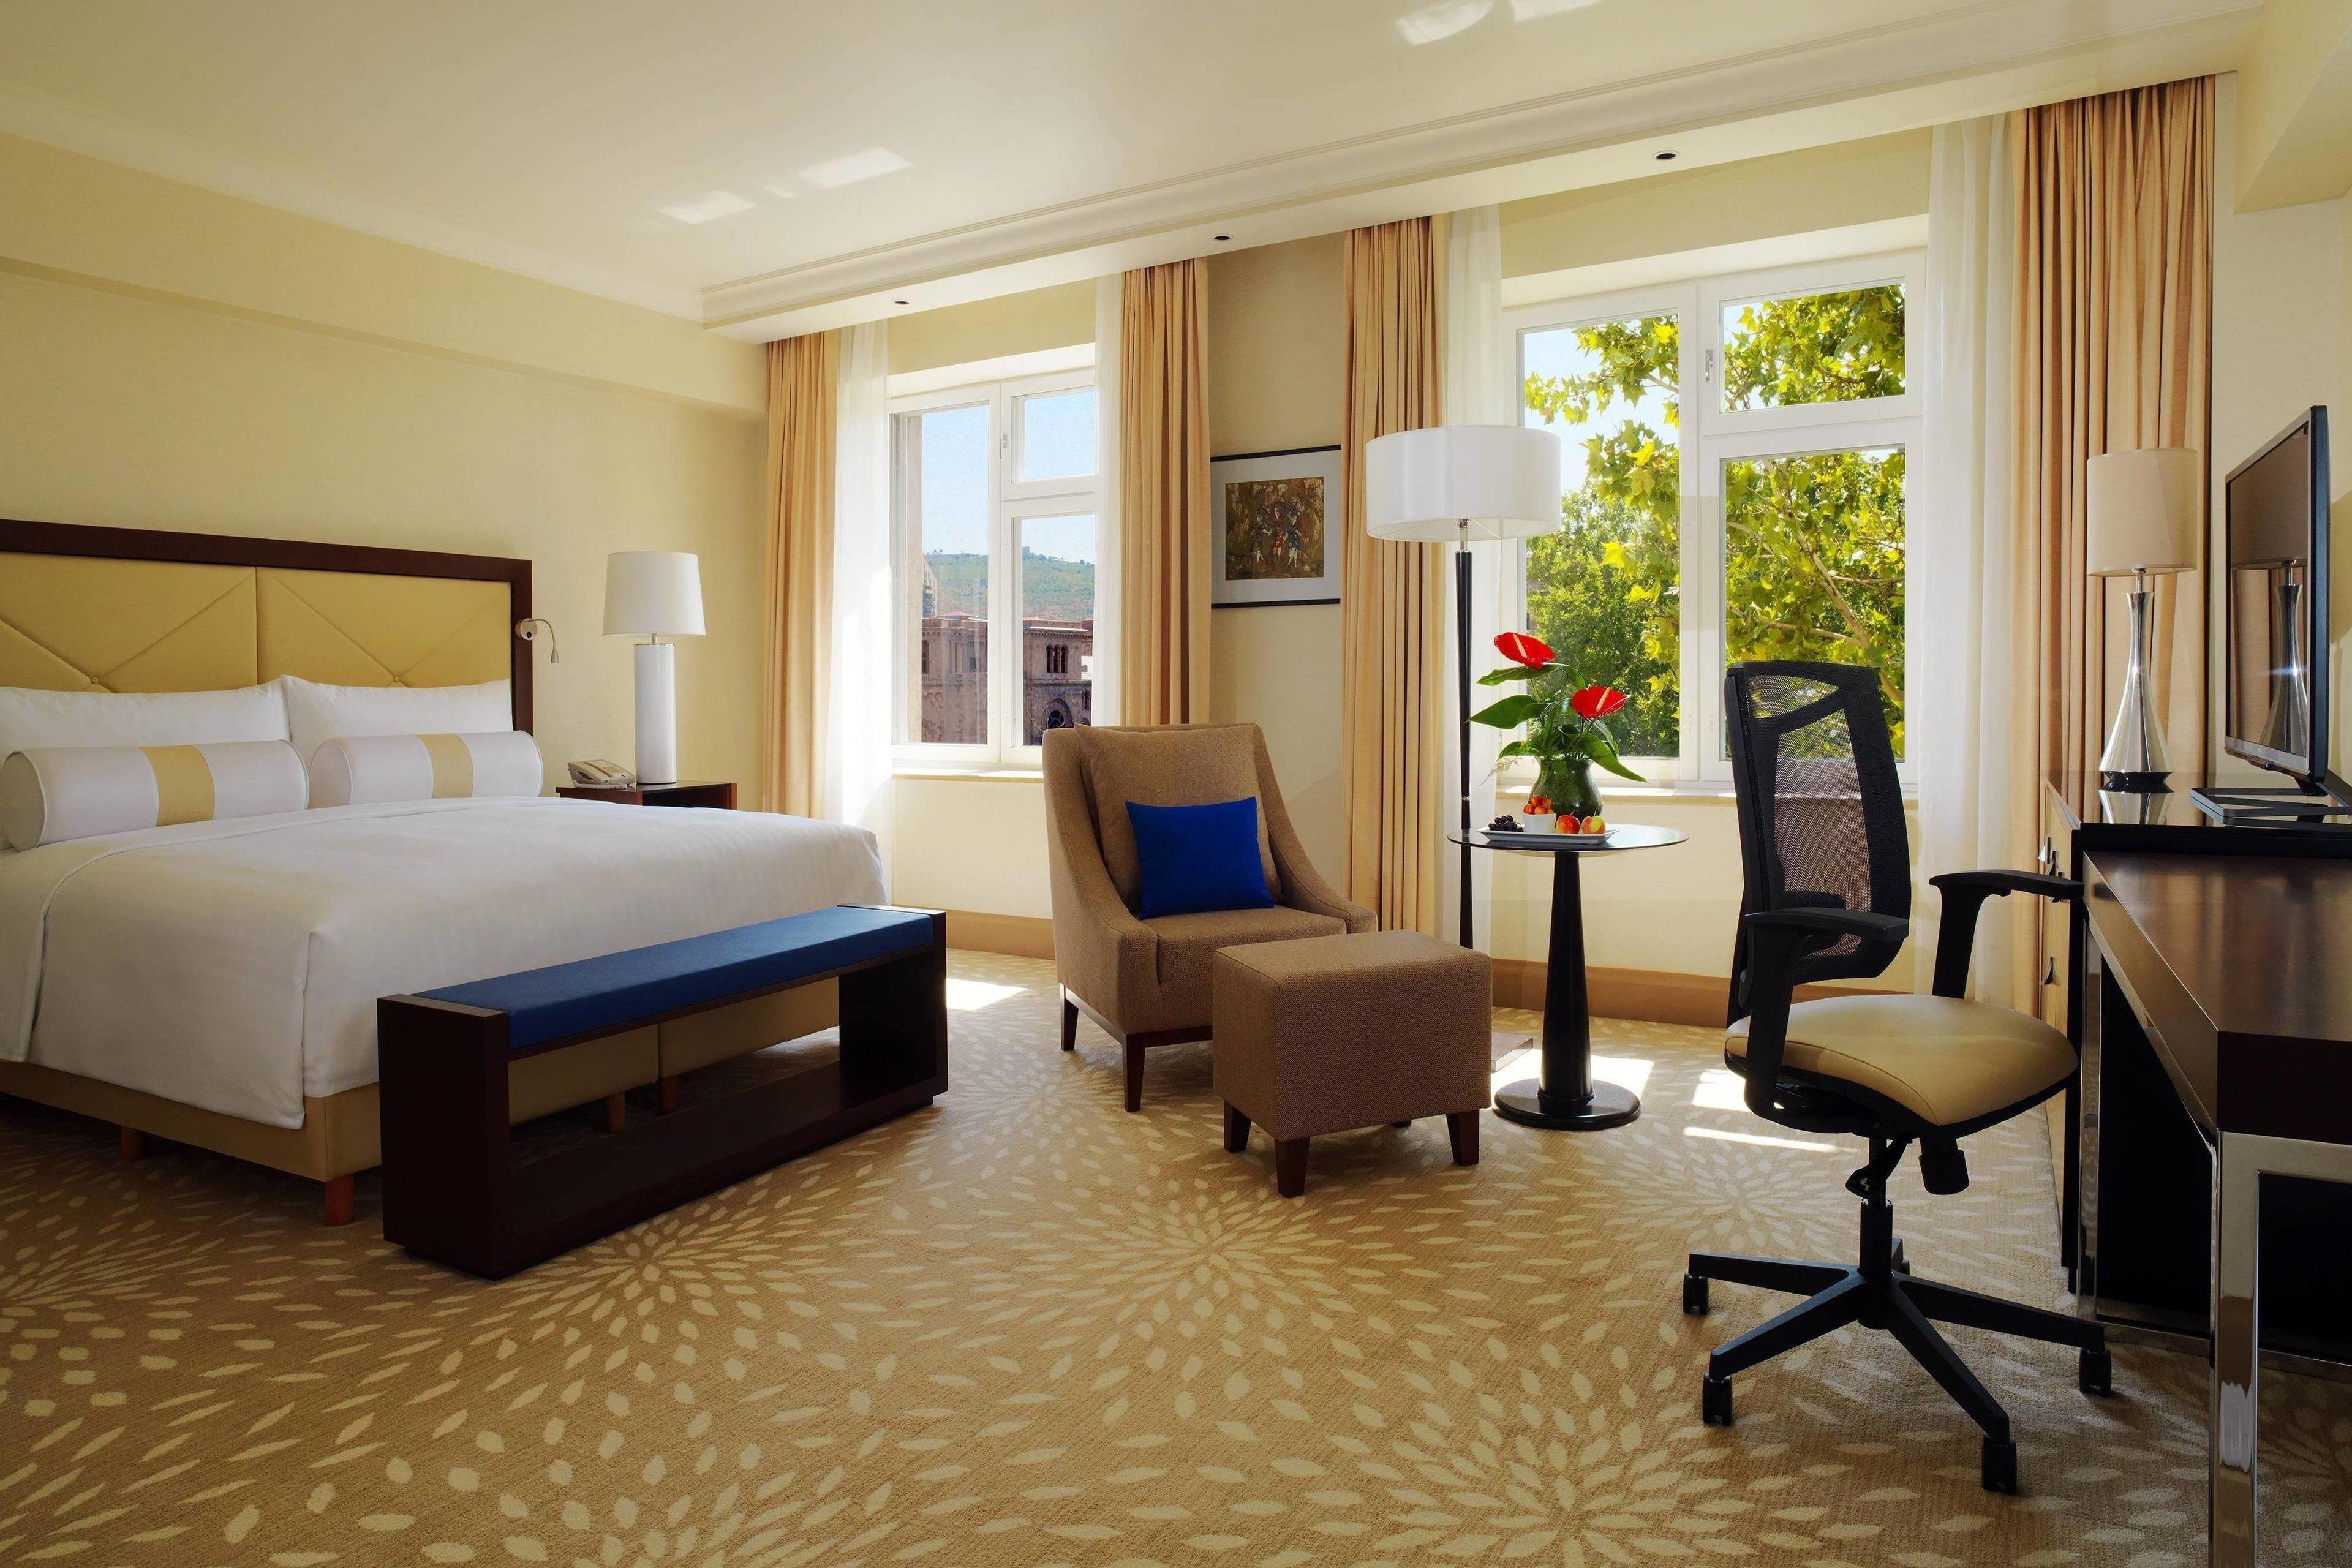 The superior deluxe rooms reflect a modern elegance and feature enhanced open space, calming neutral tones combined with rich shades and patterns. The rooms offer the latest in modern technology and comfort.